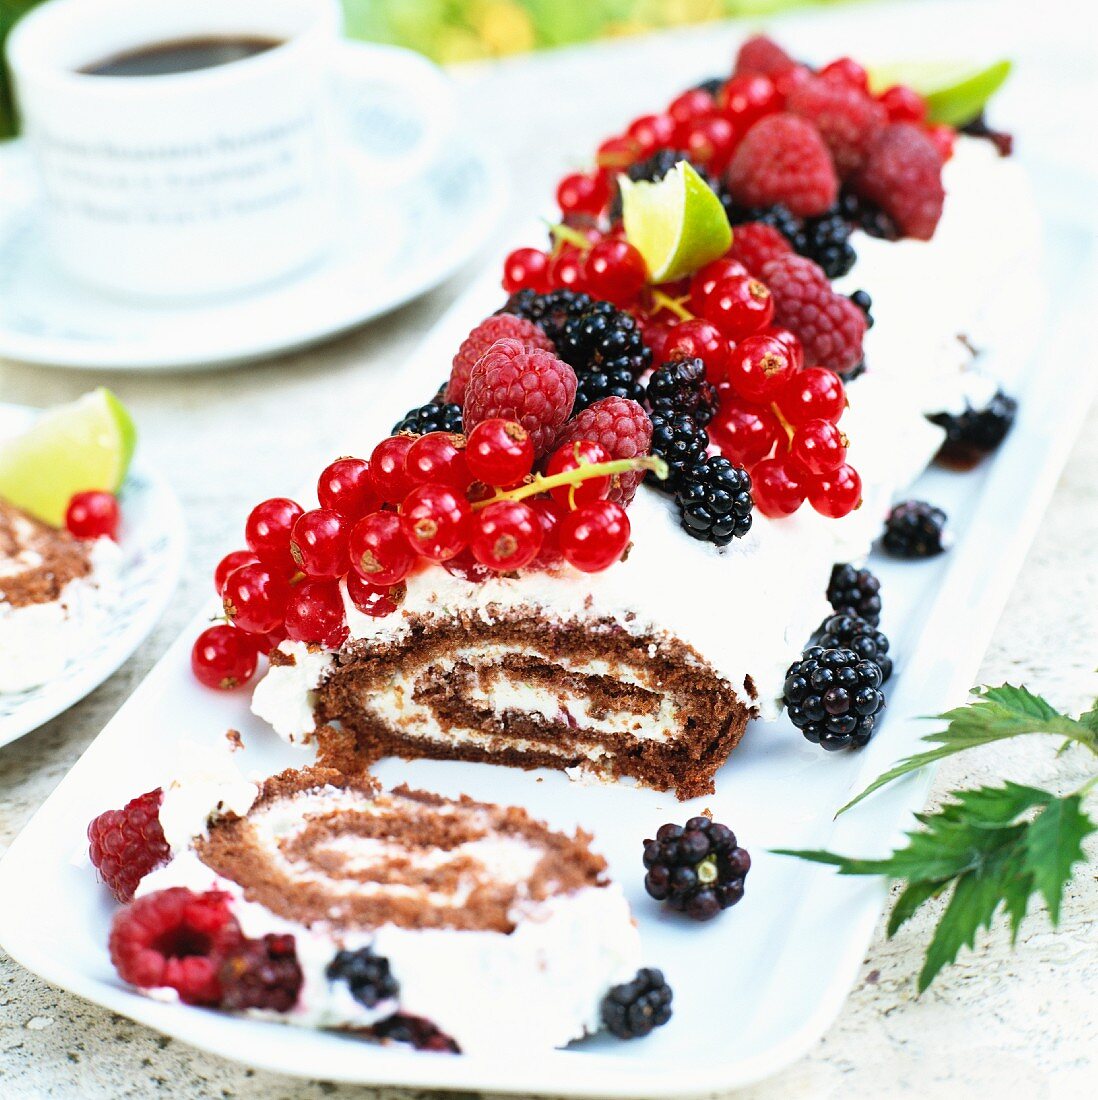 A Swiss roll with cream and berries